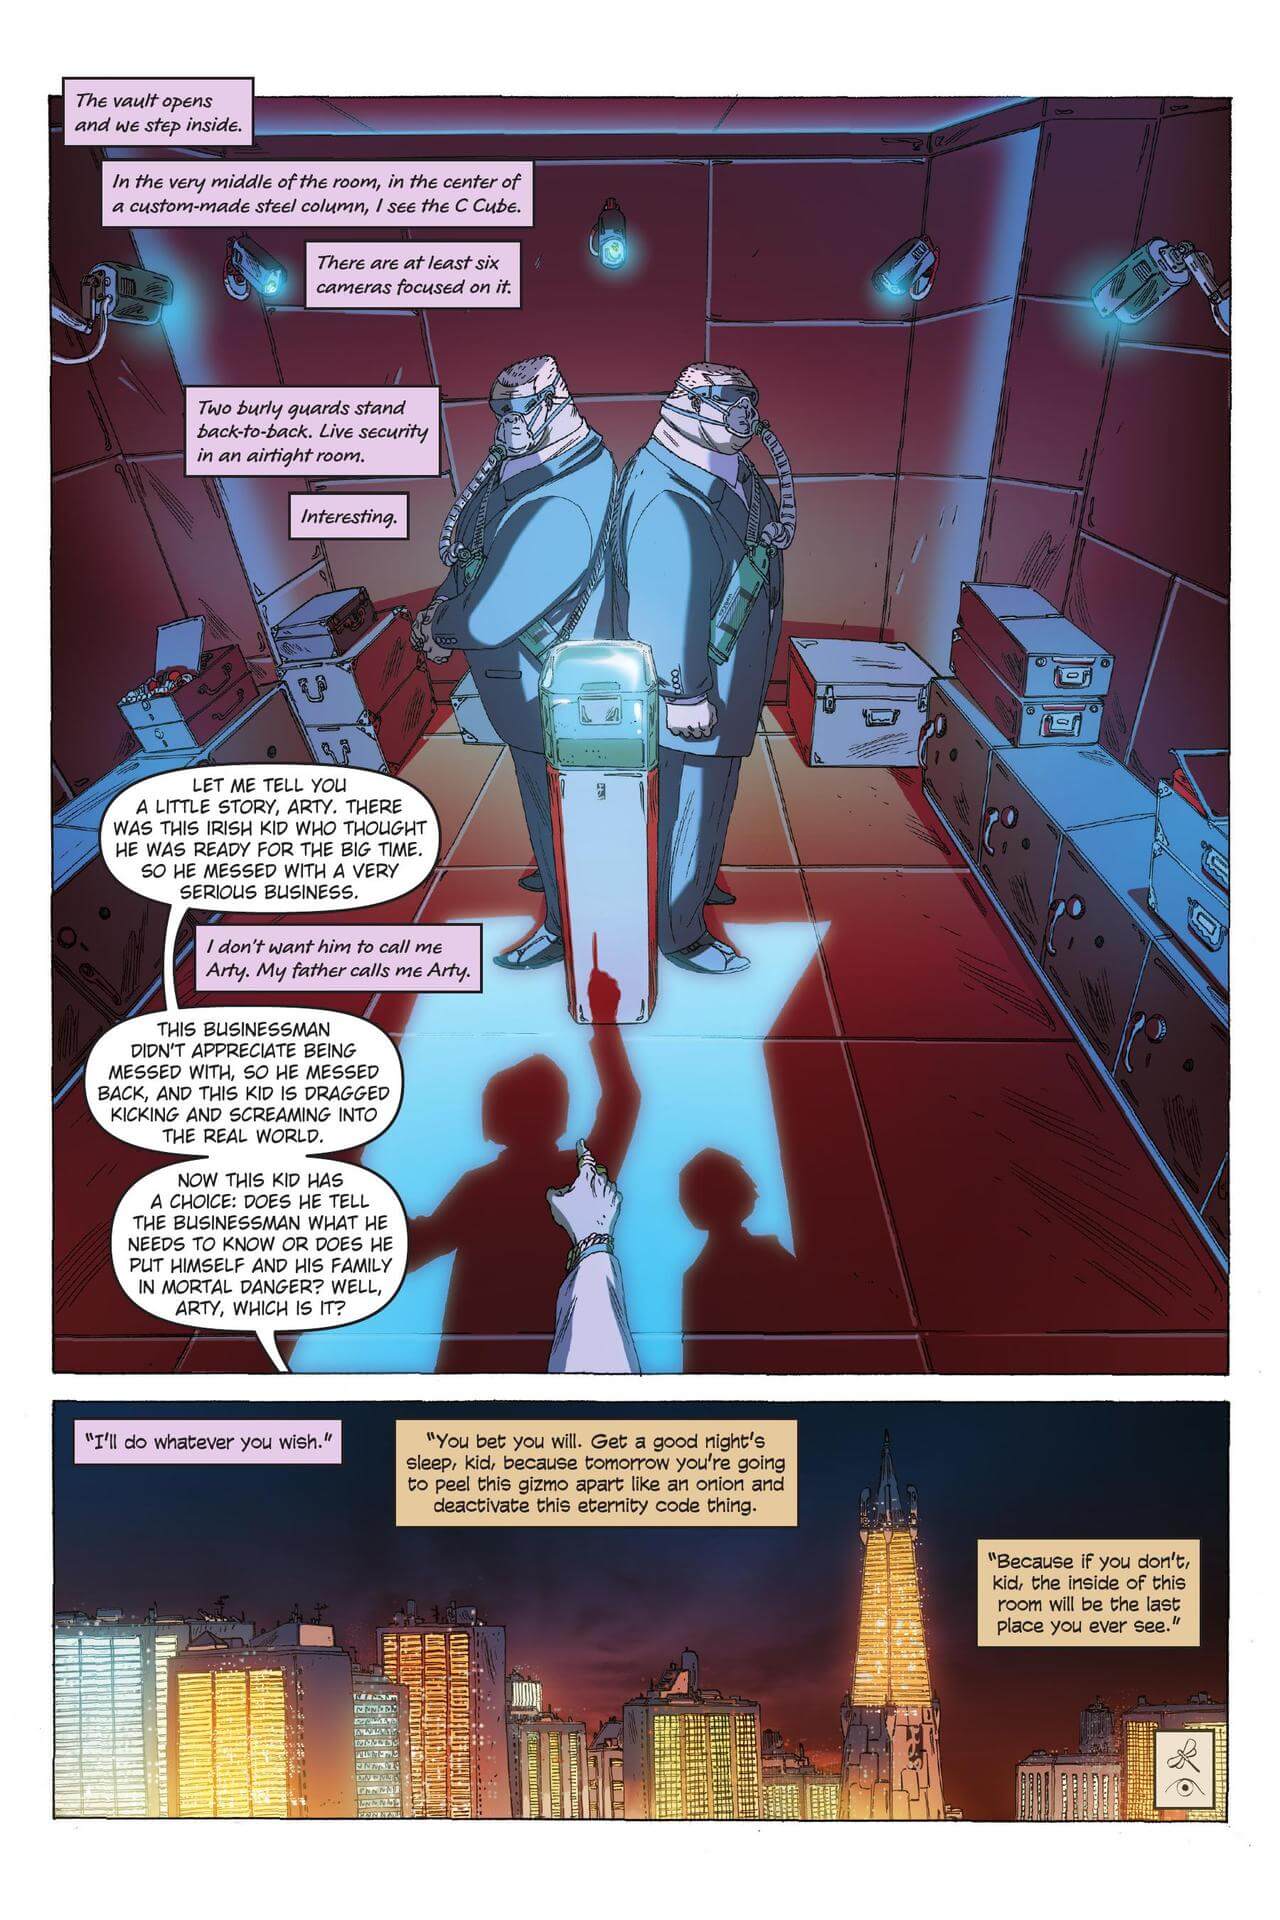 page 73 of artemis fowl eternity code graphic novel